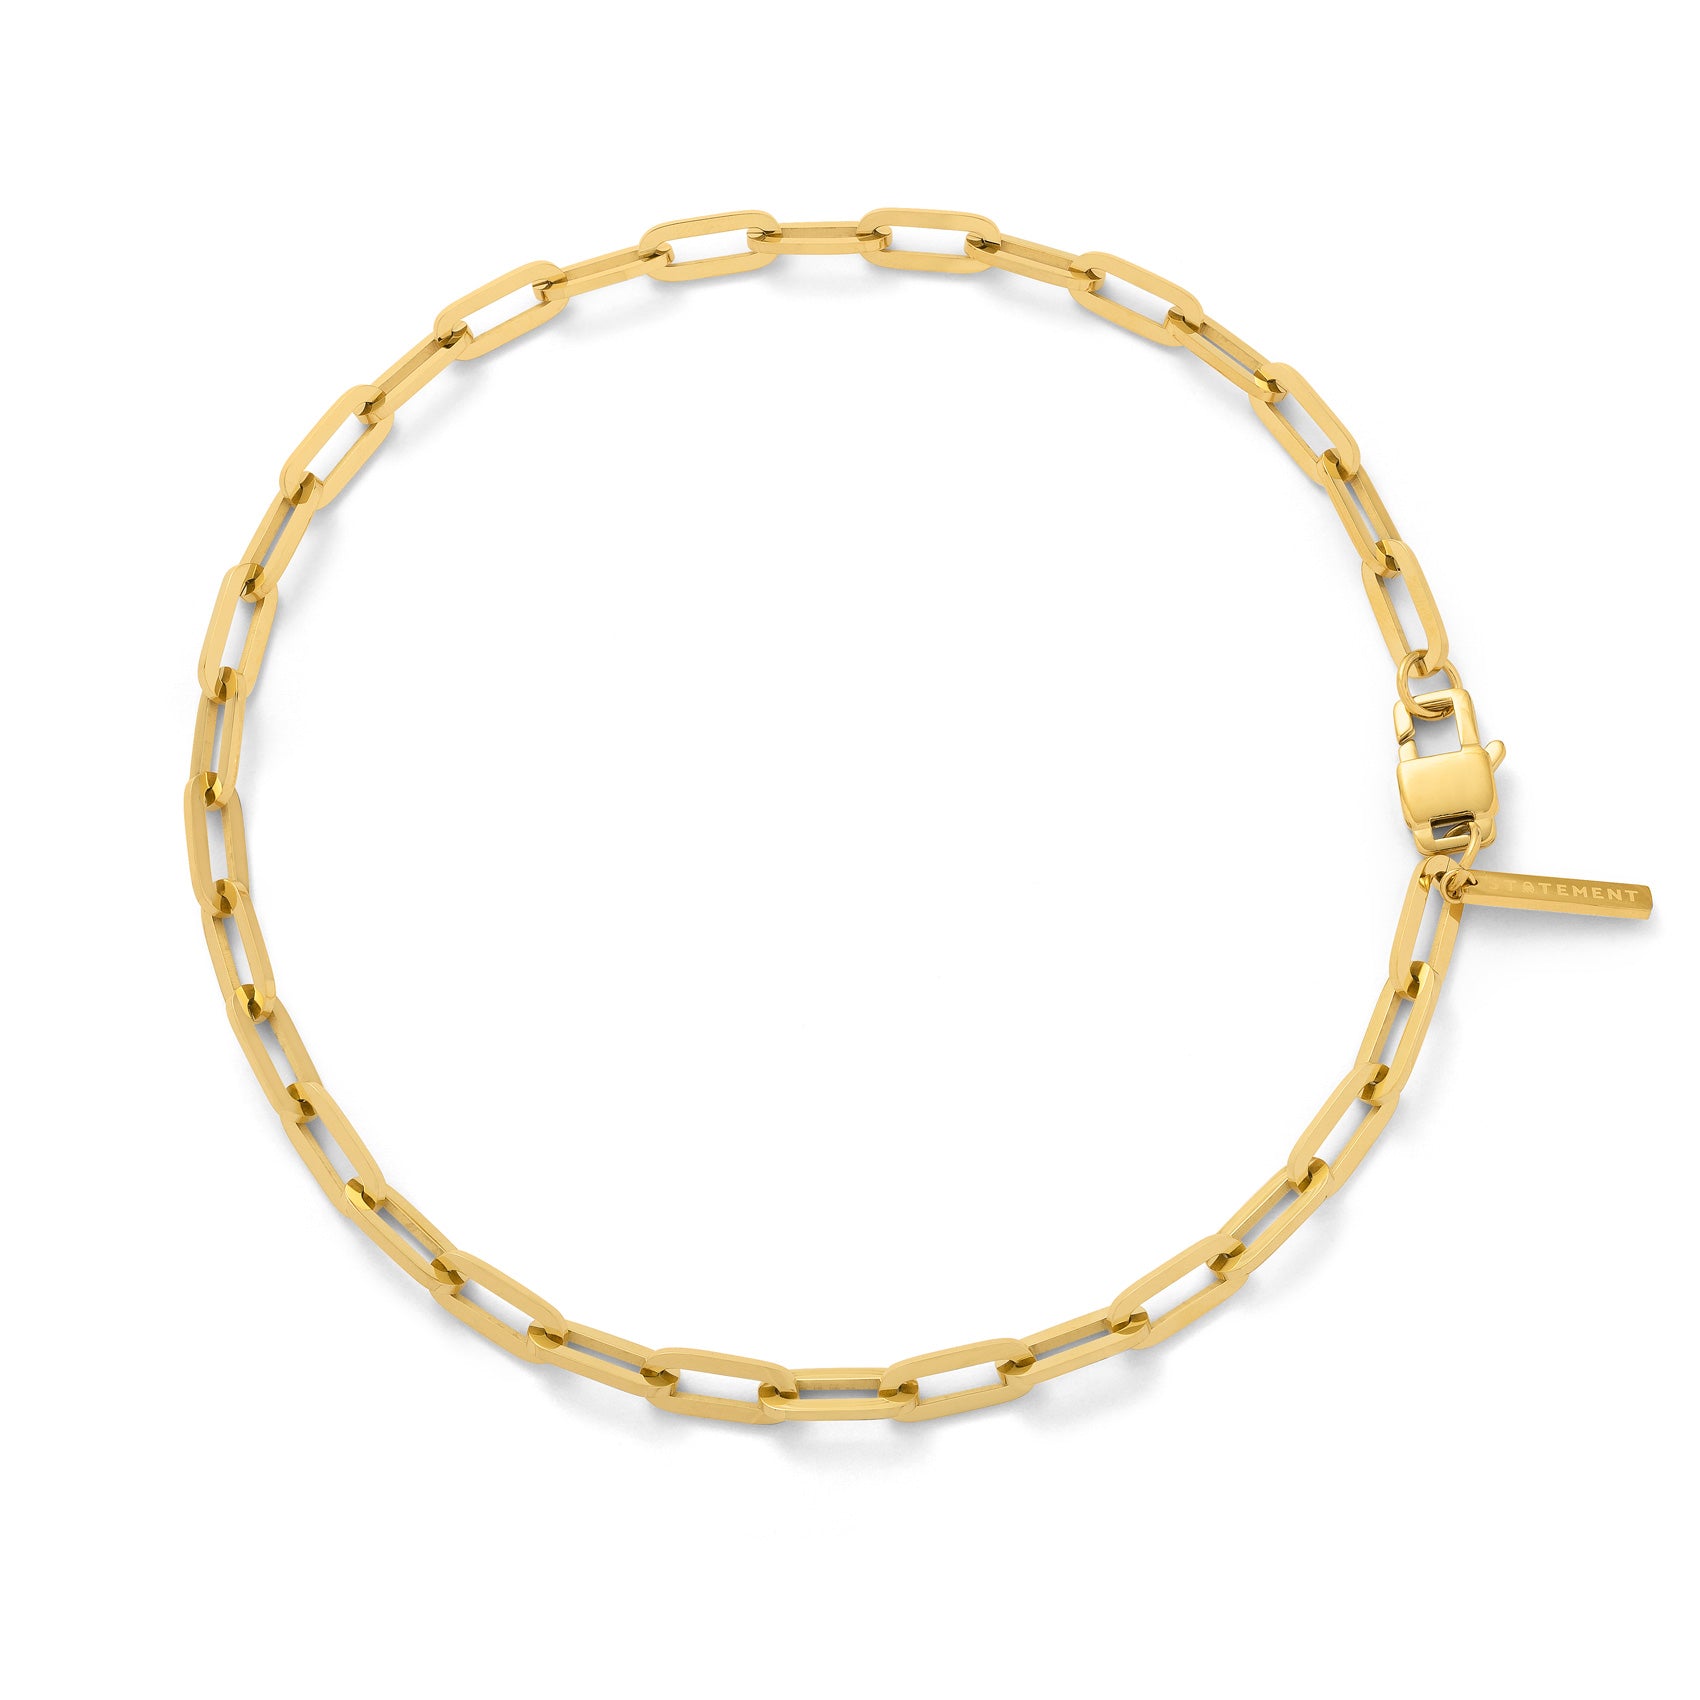 Gold rectangle chain link necklace on white background